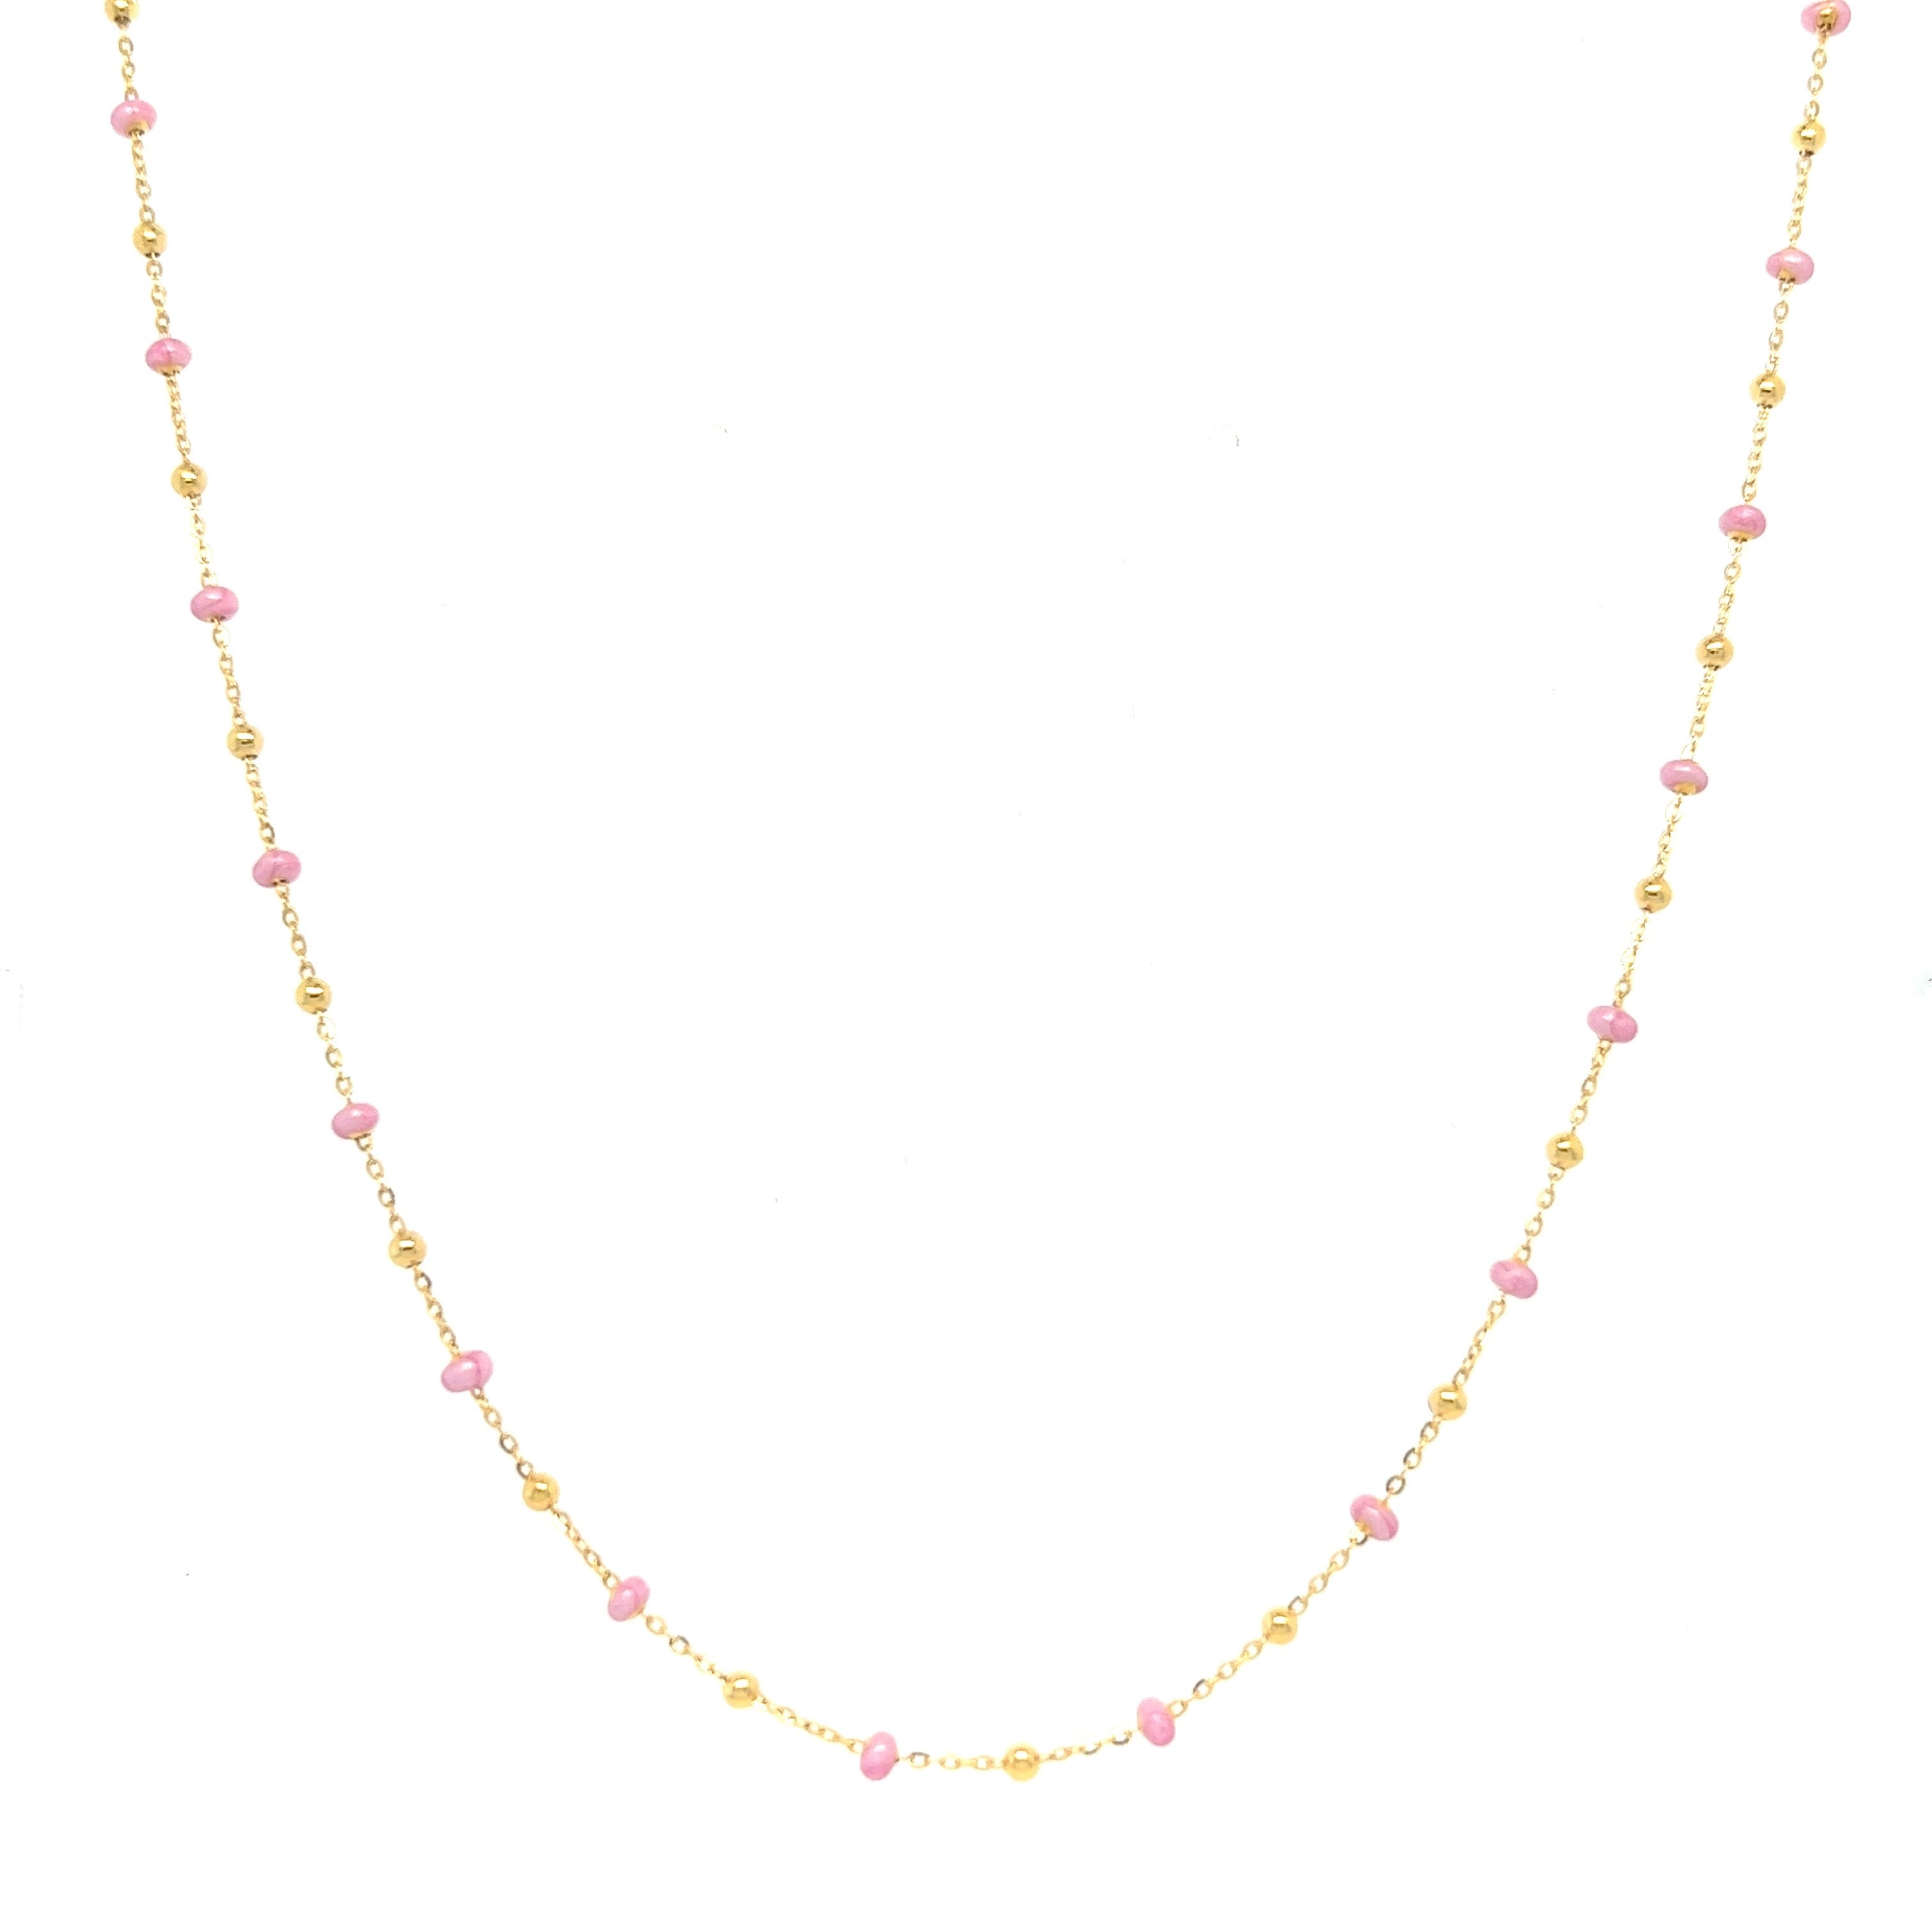 Pretty in Pink Beaded Necklace